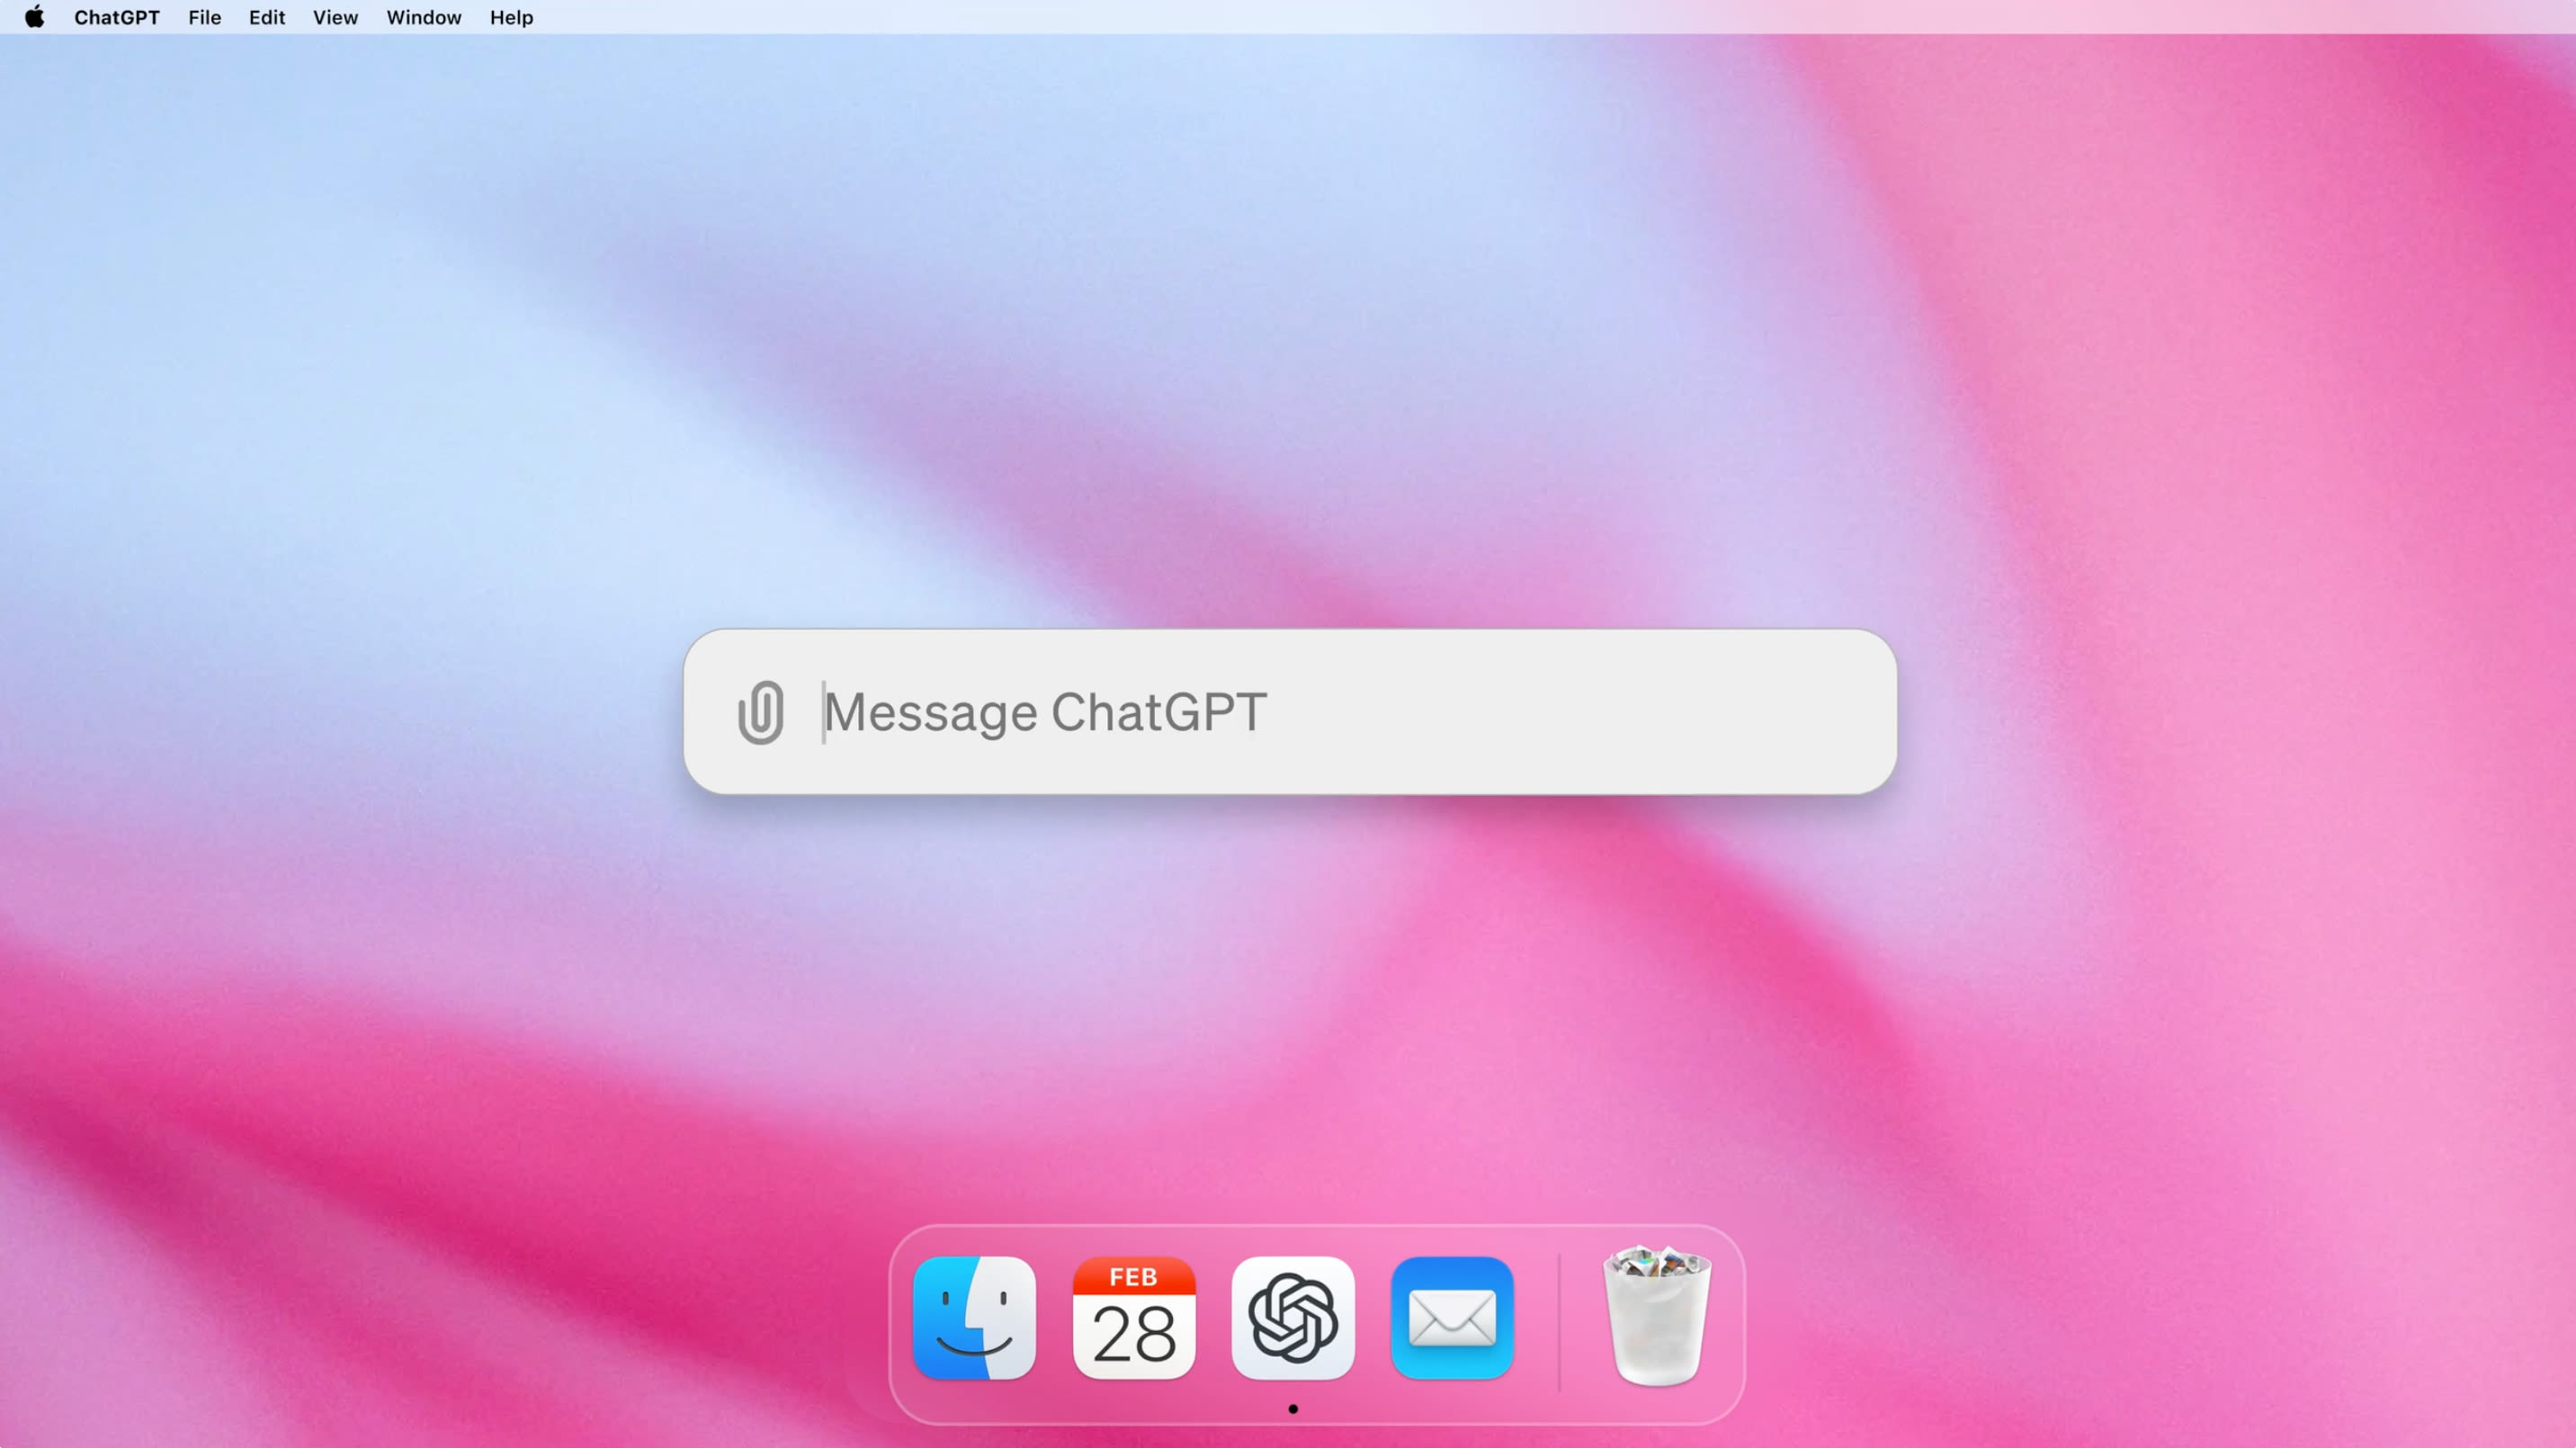 ChatGPT for macOS no longer requires a subscription